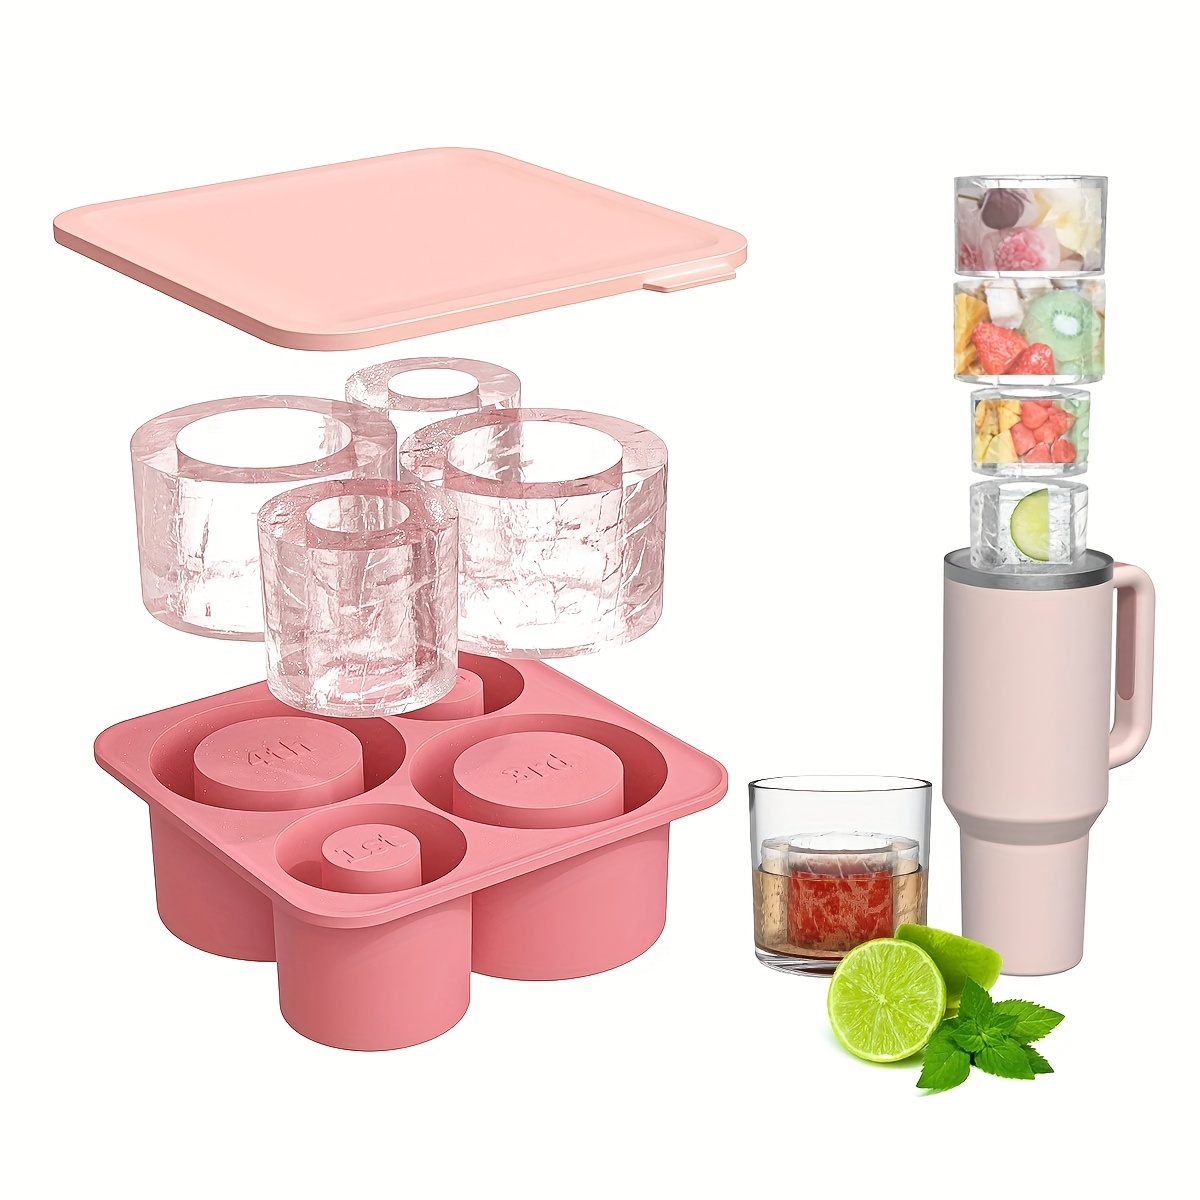 

Custom-fit Silicone Ice Cube Tray With Lid For Stanley Cups - Perfect For 20oz, 30oz, 40oz Tumblers - Food Grade, Spill-proof & Versatile Mold For Chocolates & Treats